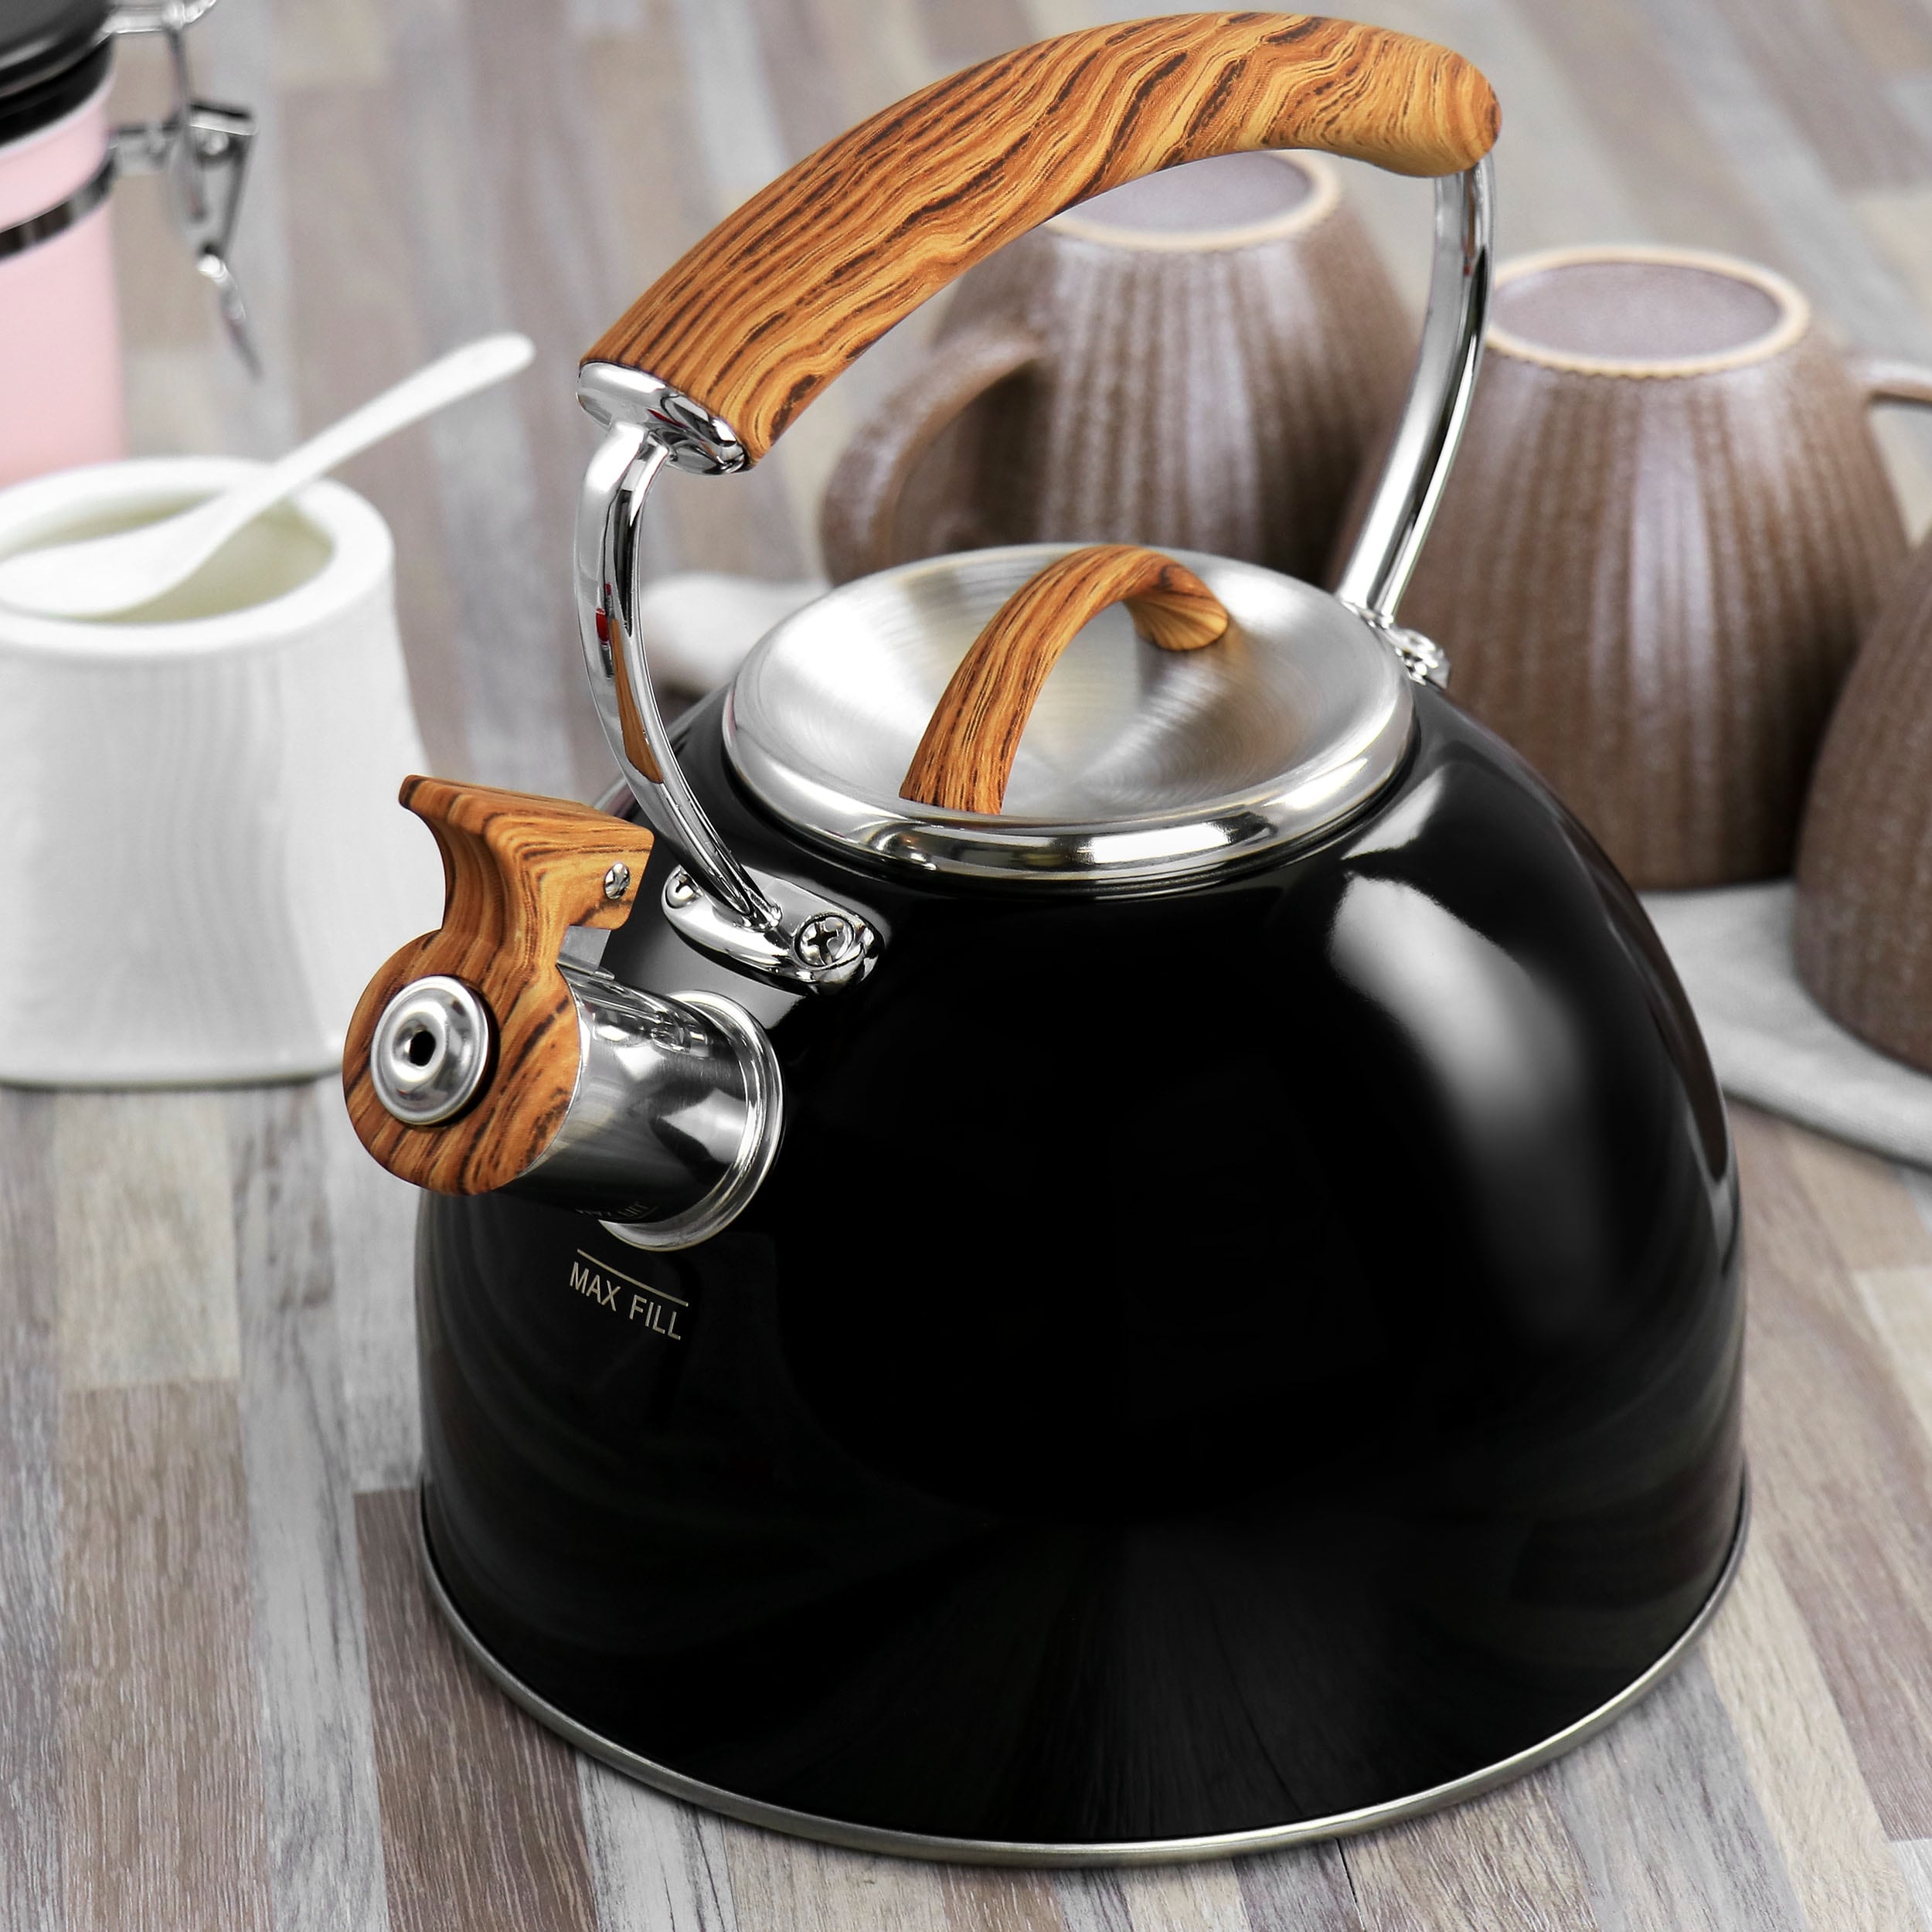 https://ak1.ostkcdn.com/images/products/is/images/direct/f141231548d06fb5b6f3246620cd93e00908e49a/Mr.Coffee-2Qt.-Stainless-Steel-Whistling-Tea-Kettle.jpg